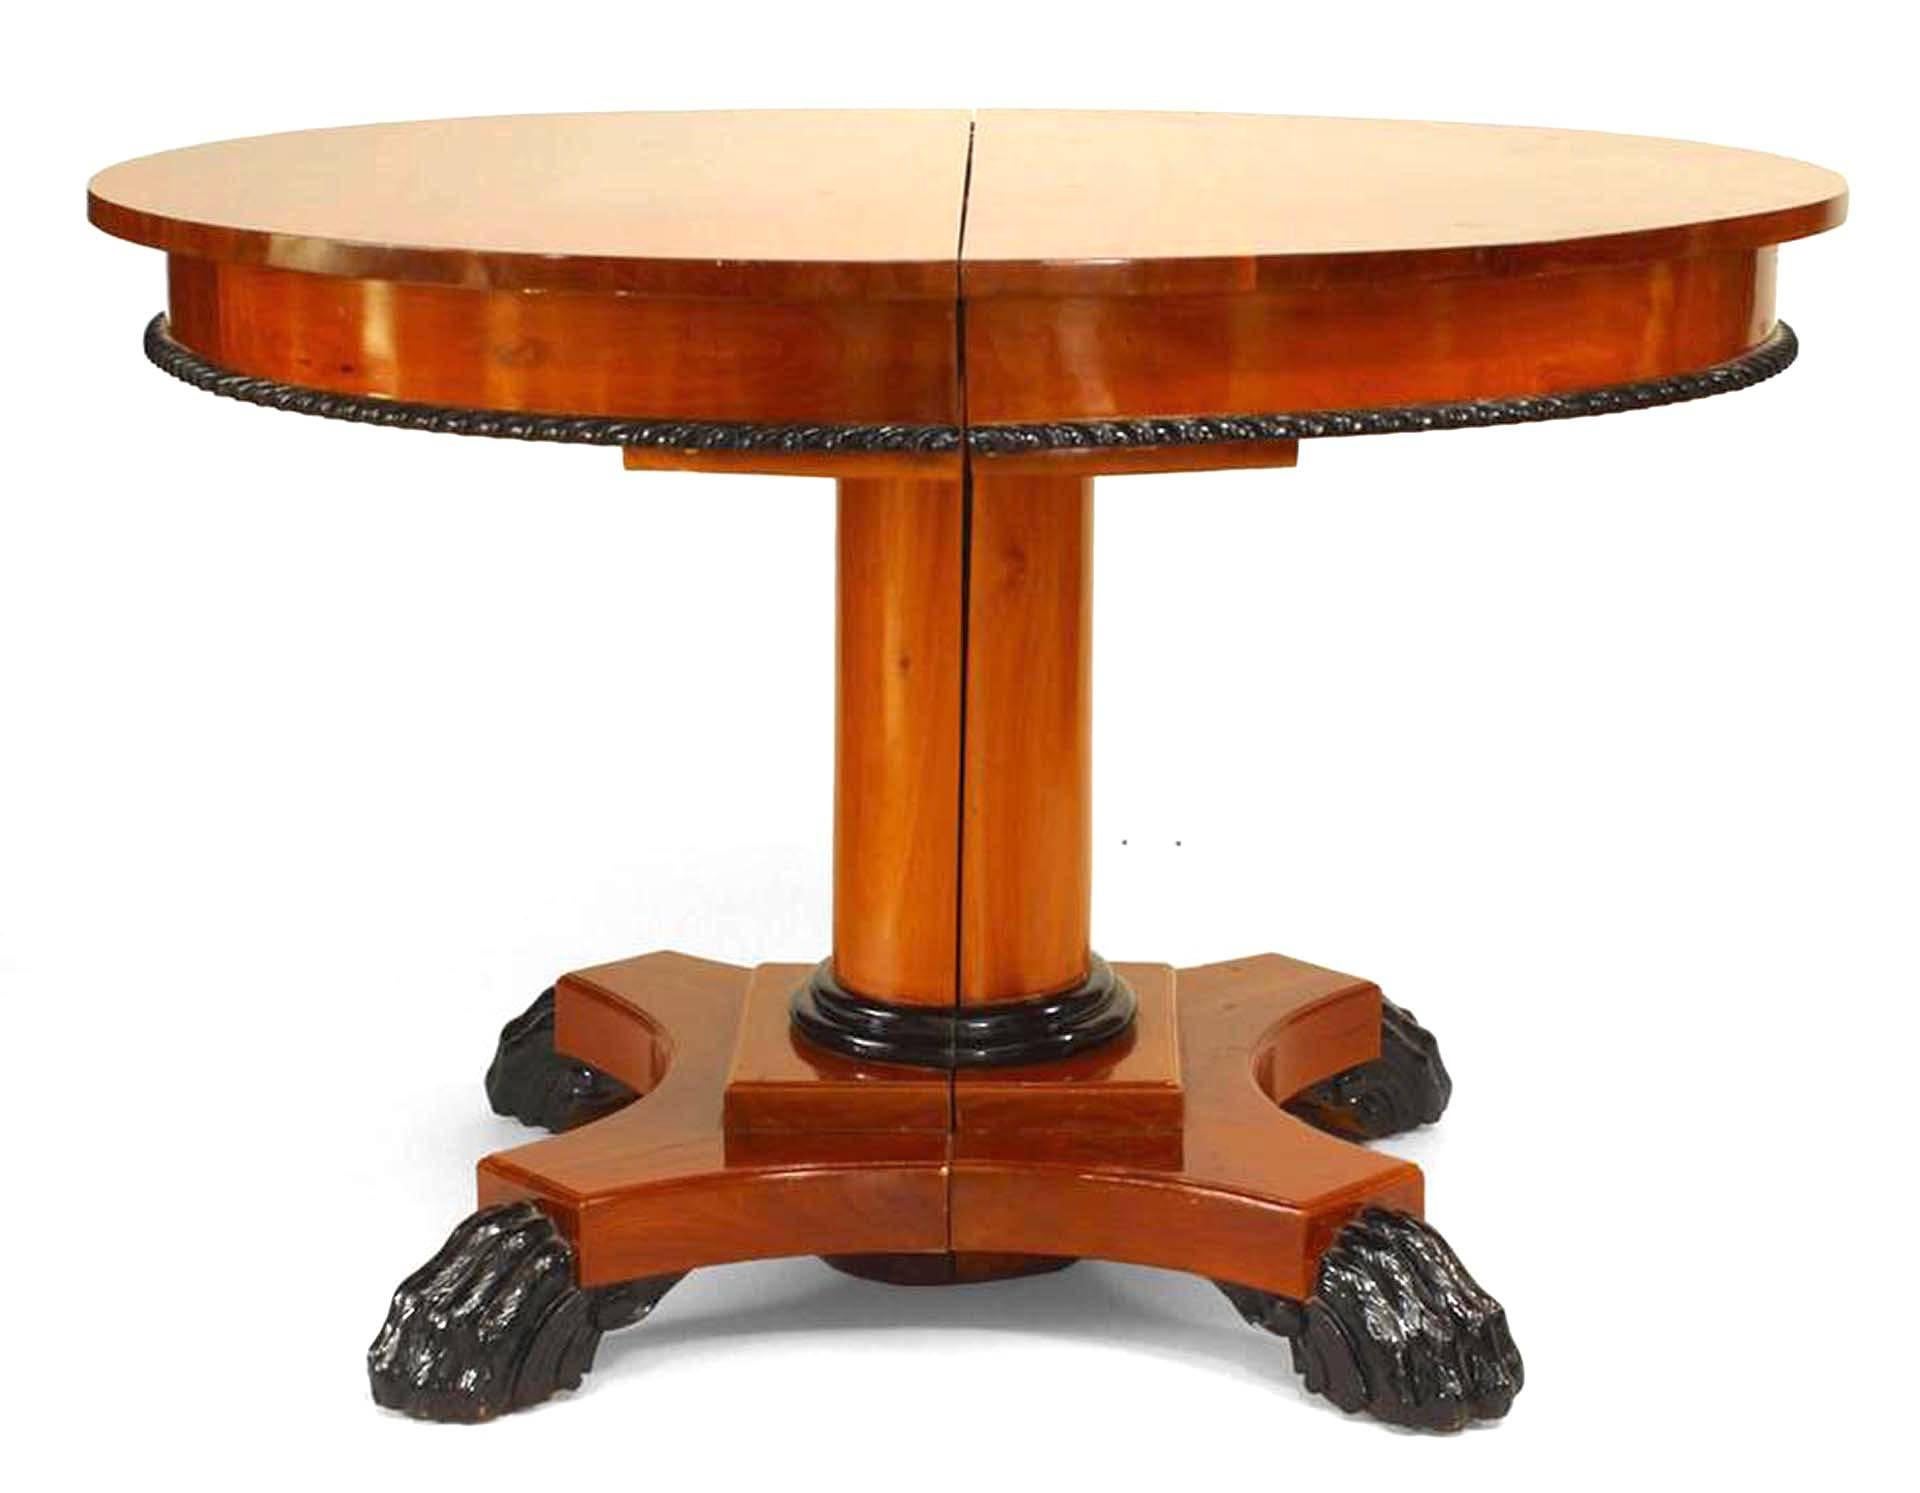 Austrian Biedermeier-style (modern) mahogany round pedestal base dining table with ebonized rope trim on apron and claw feet. (4 leaves with apron at 17.5